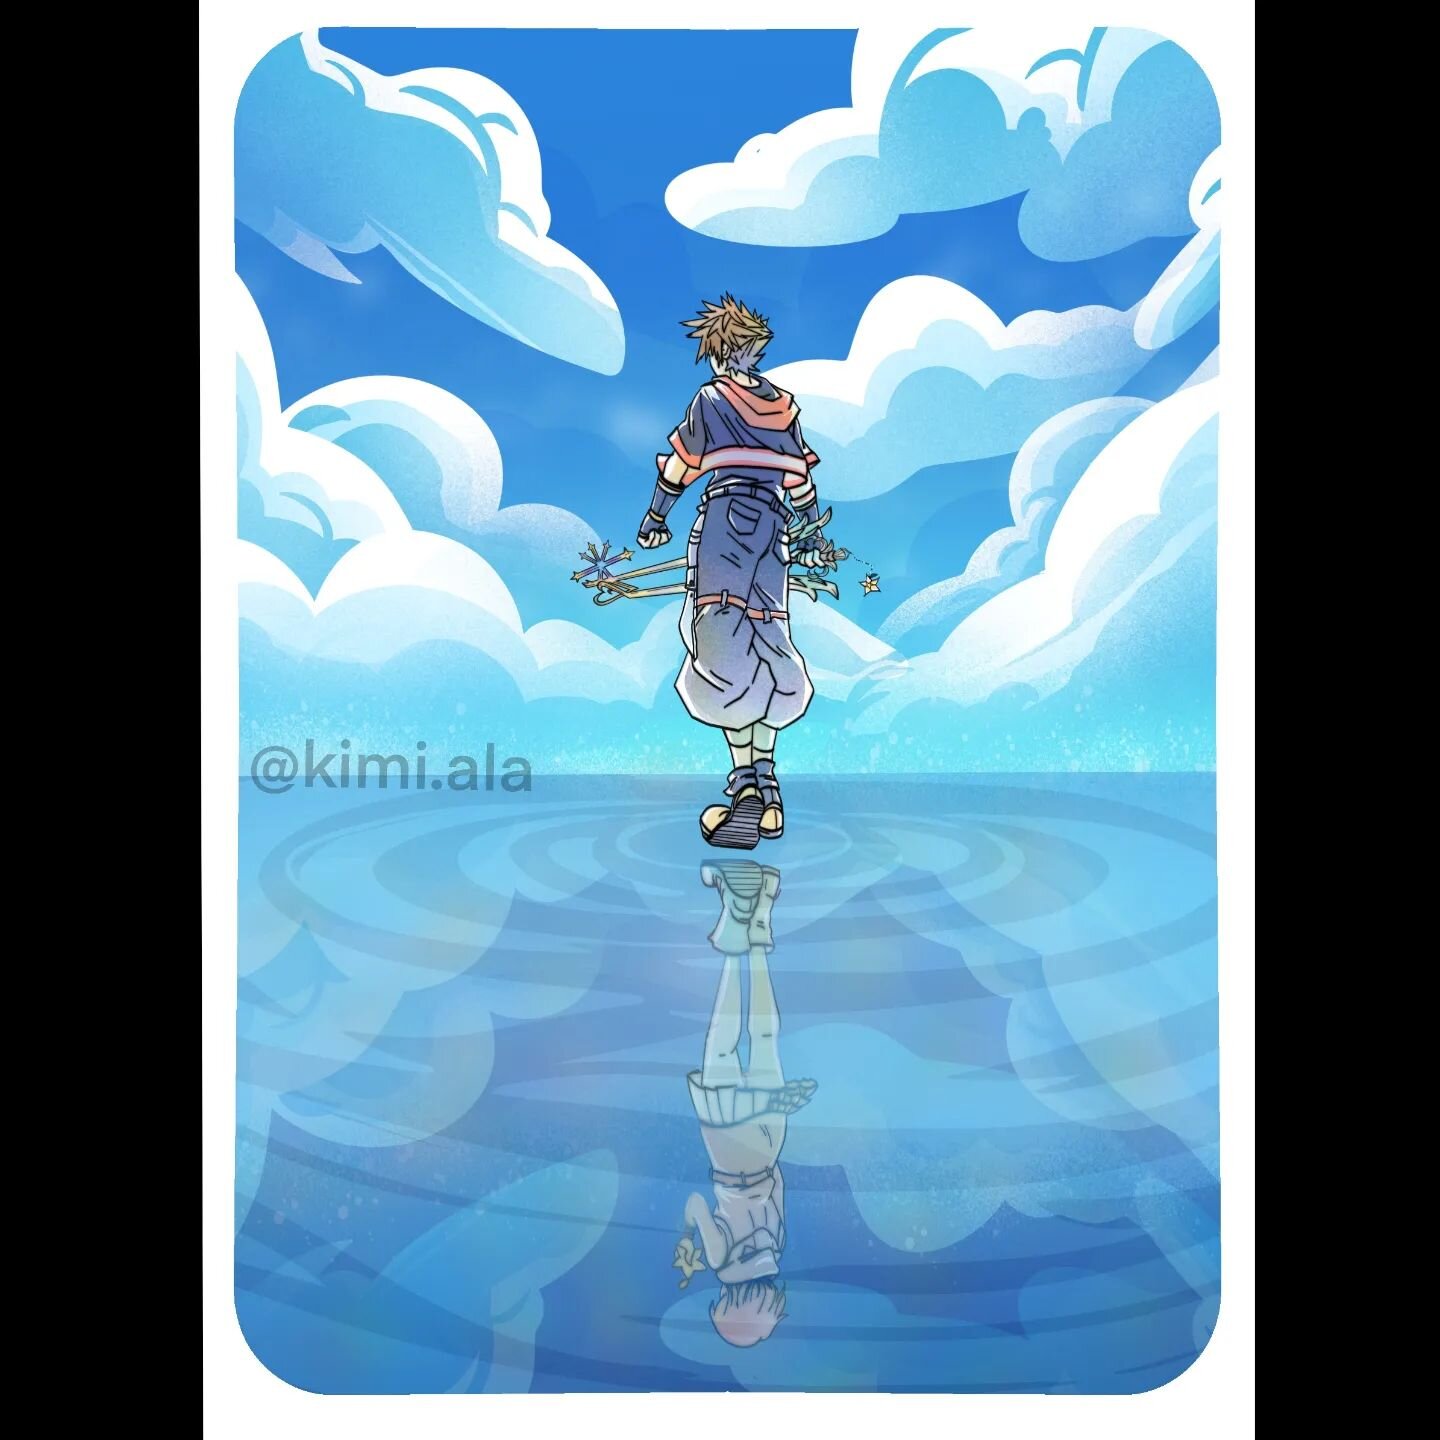 Oathkeeper: Kingdom Hearts 3 Print
(Please 🙏 ignore the differences in the physical prints, I am still testing formatting and colors XD)
.
.
.
.
#kingdomhearts #kingdomhearts3 #sora #kairi #digitalart #procreate #illustration #instaart #drawing #pai